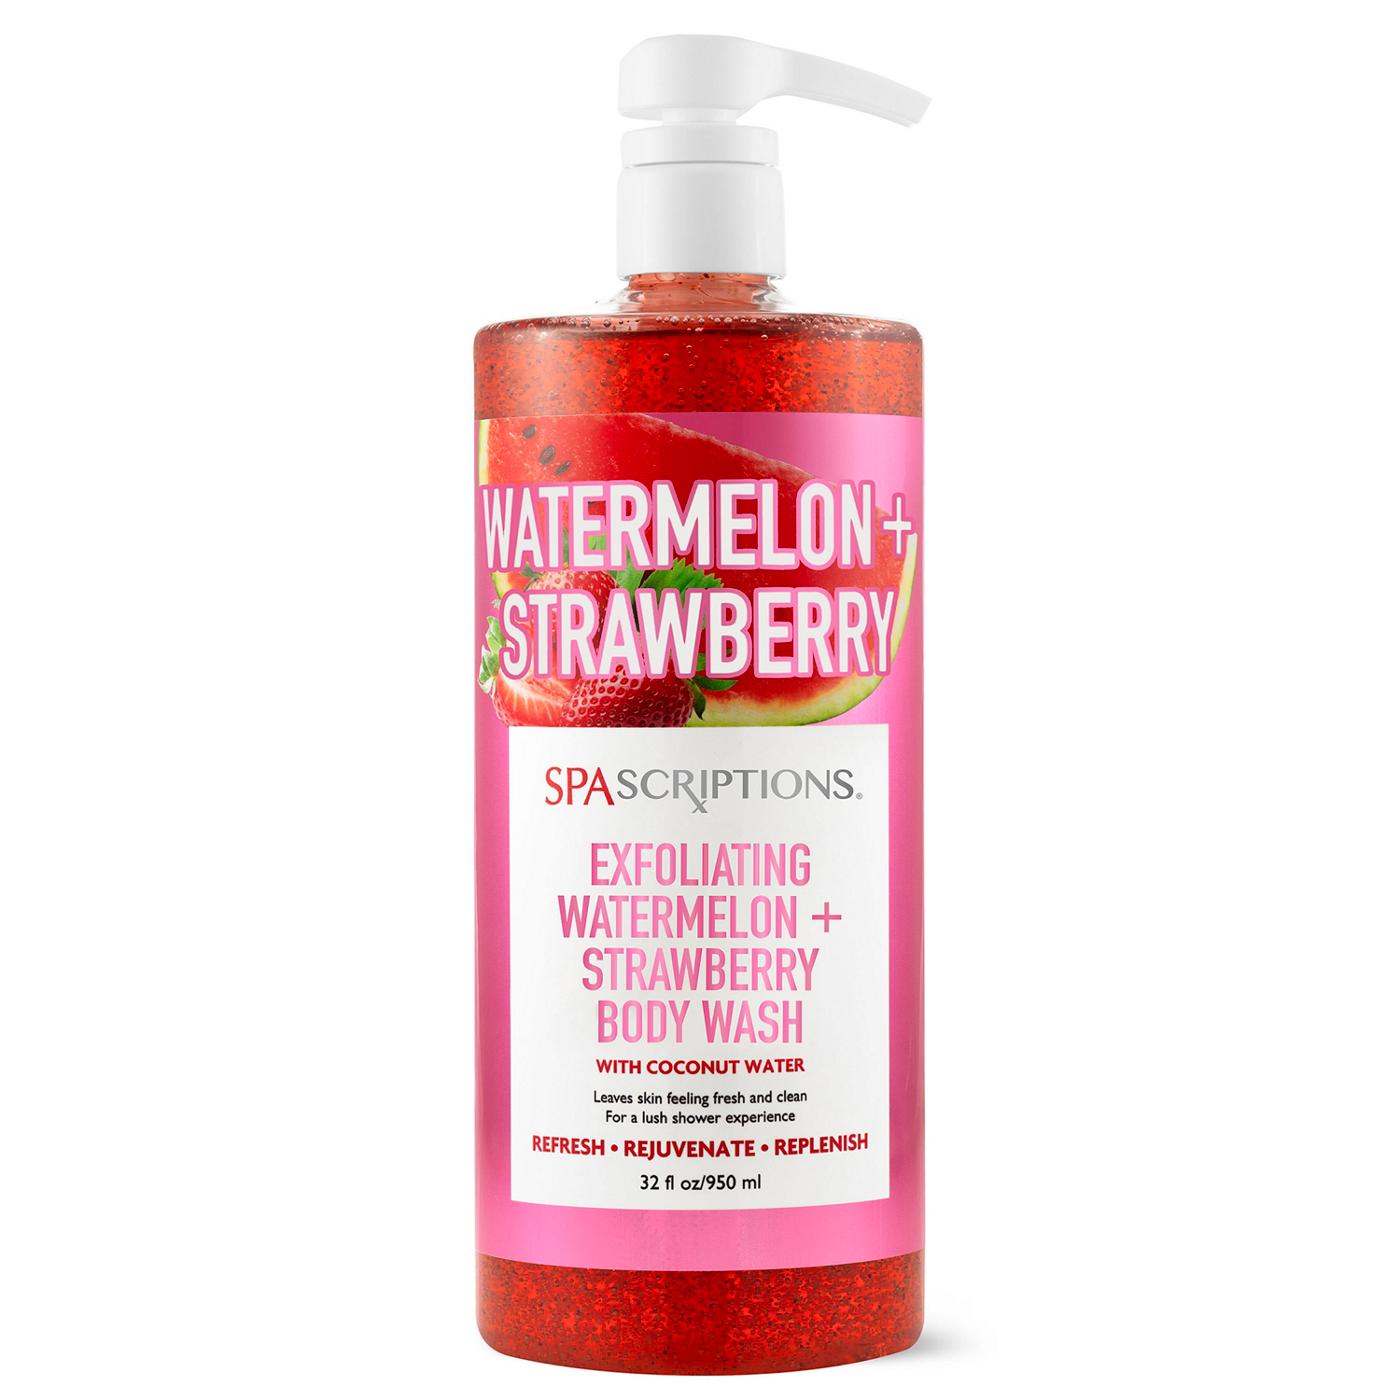 SpaScriptions Exfoliating Body Wash - Watermelon + Strawberry ; image 1 of 2